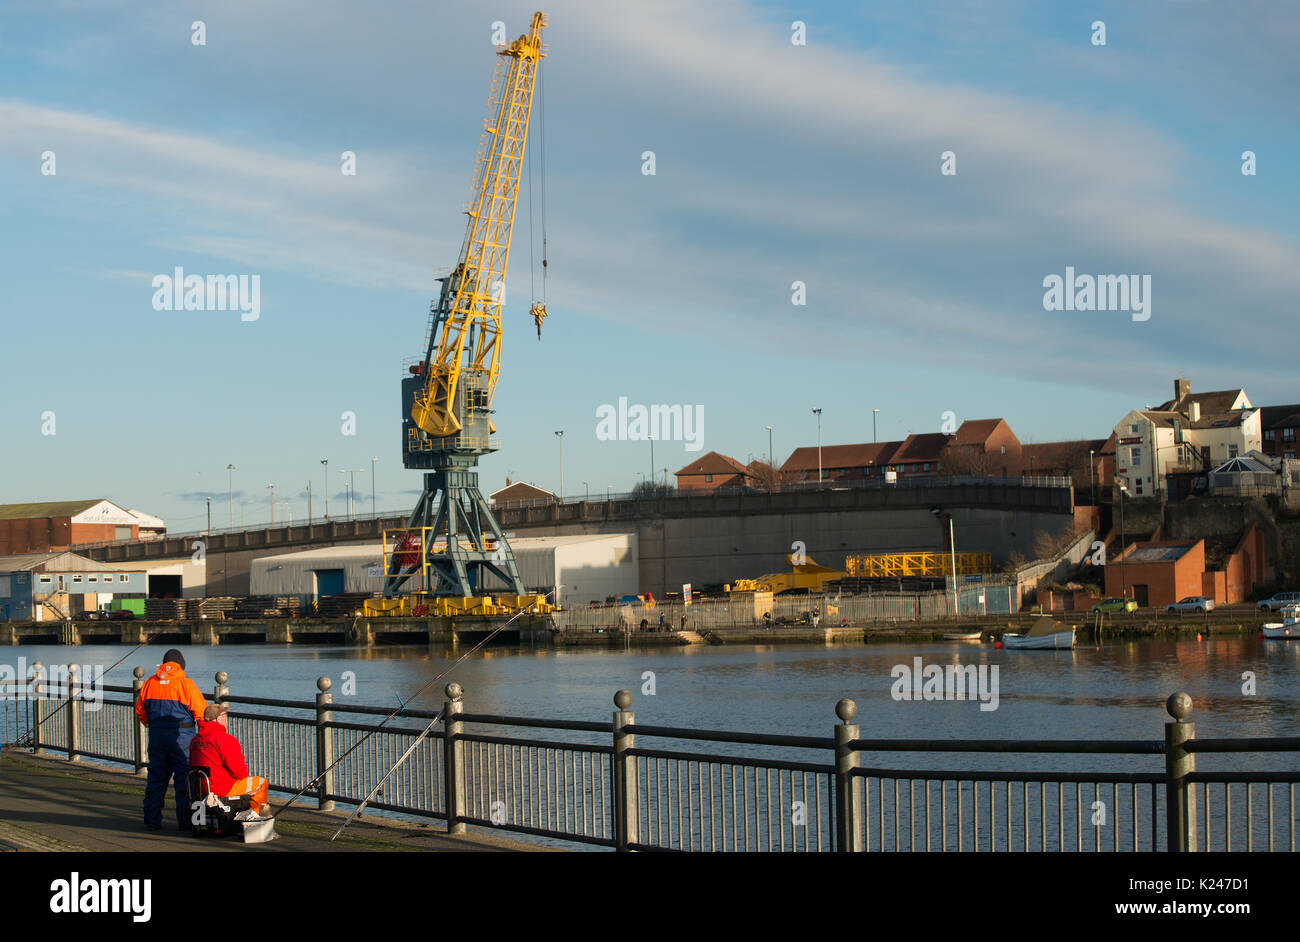 Fishermen using rod and line along the harbour side and the River Wear in the City of Sunderland with large riverside crane in the background Stock Photo